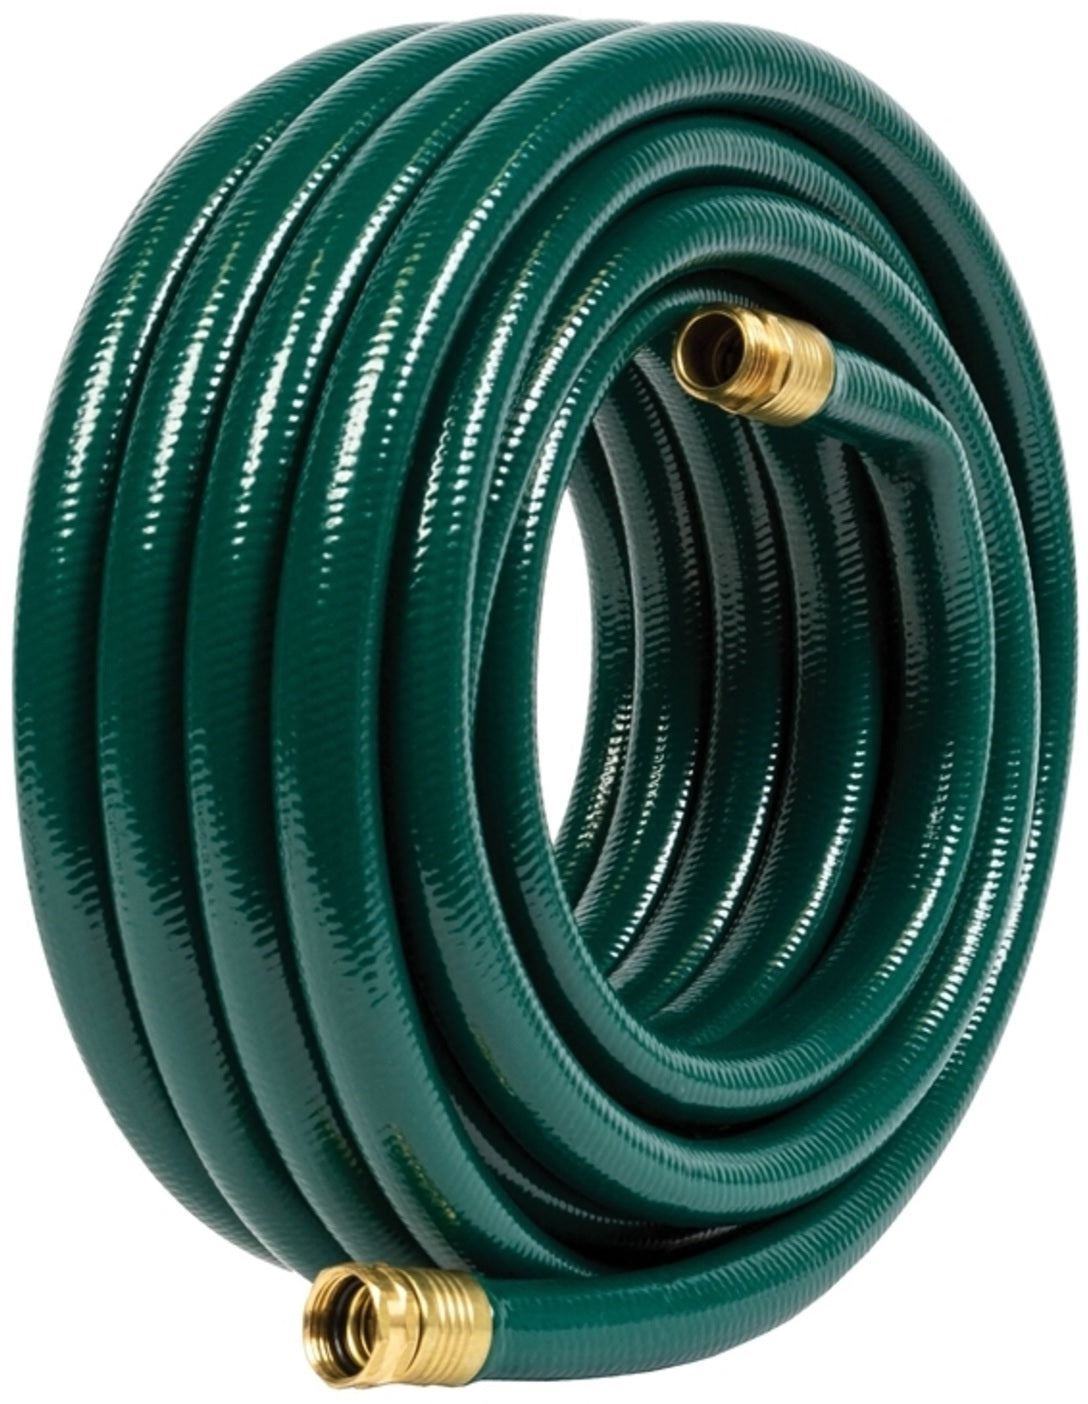 buy industrial hoses at cheap rate in bulk. wholesale & retail plumbing supplies & tools store. home décor ideas, maintenance, repair replacement parts